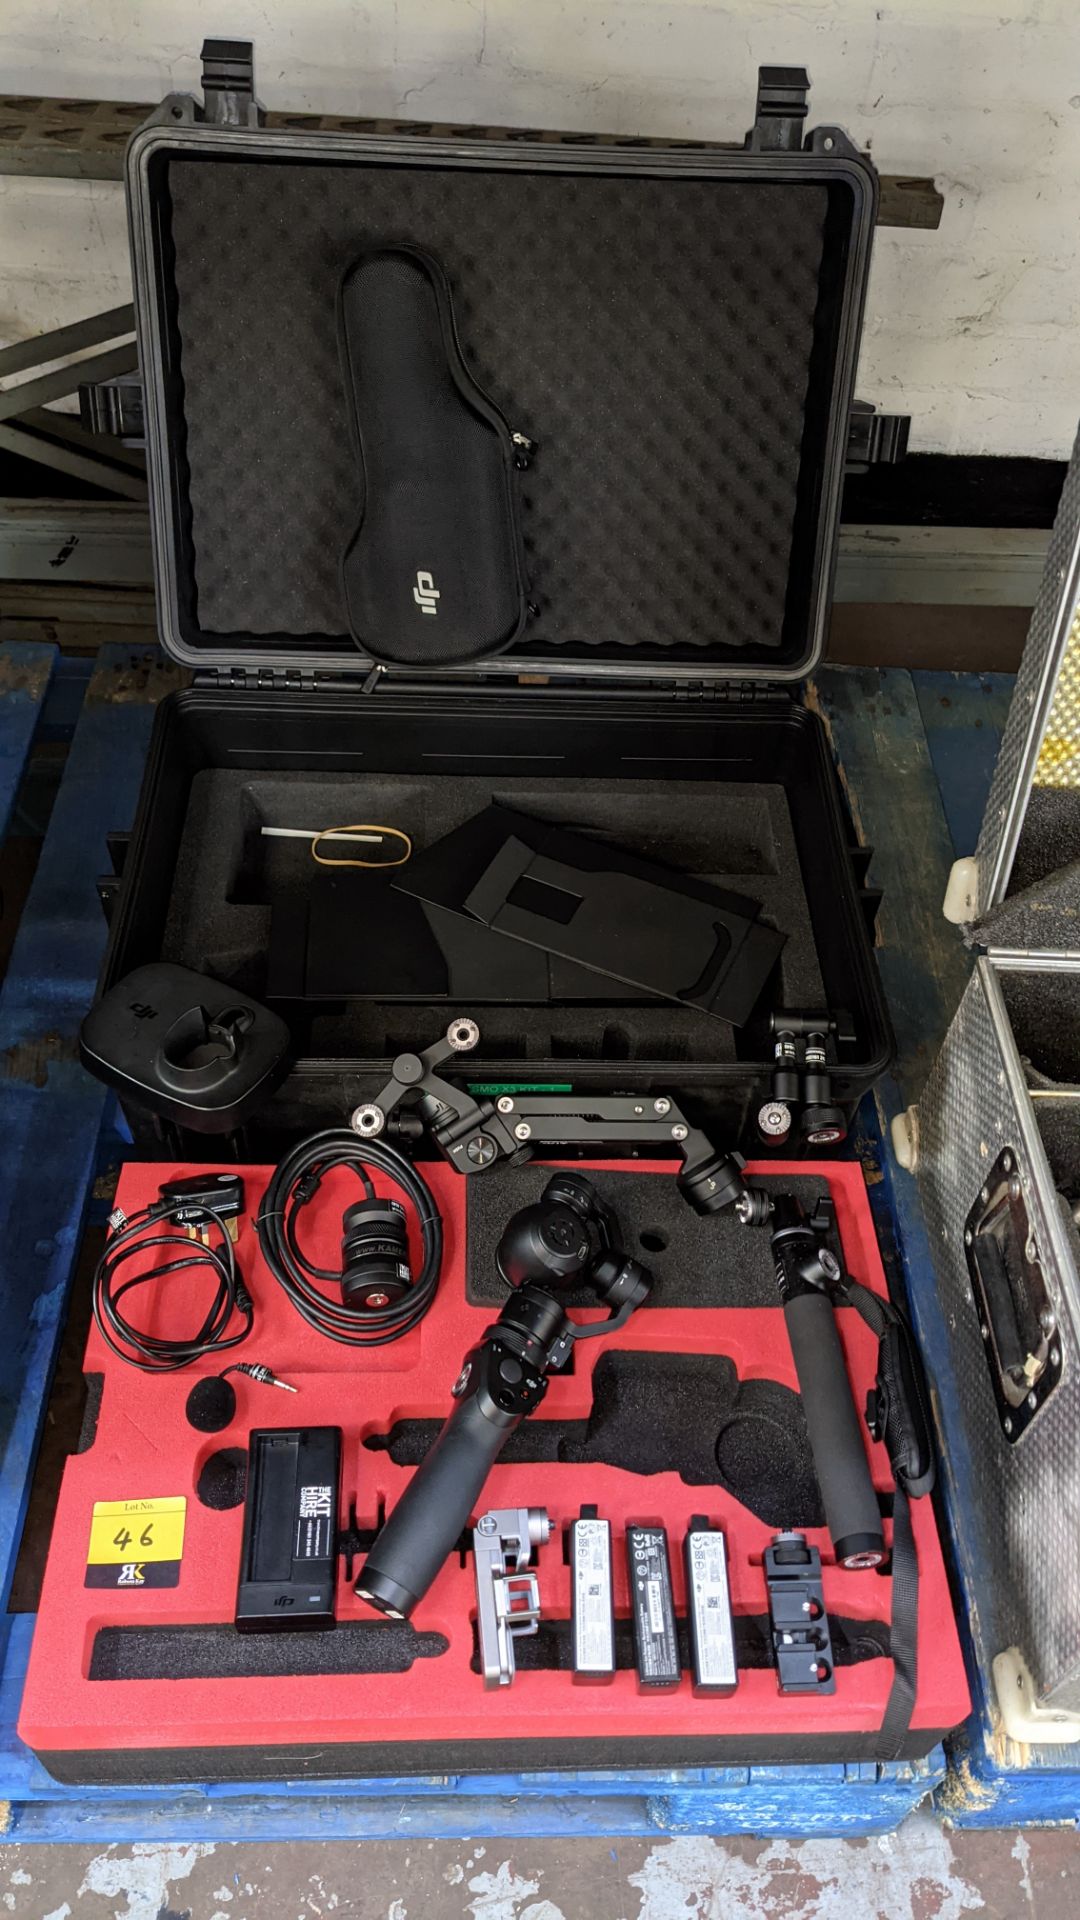 DJI Osmo X3 kit comprising hand-held gimbal plus wide variety of ancillaries for use with same, as d